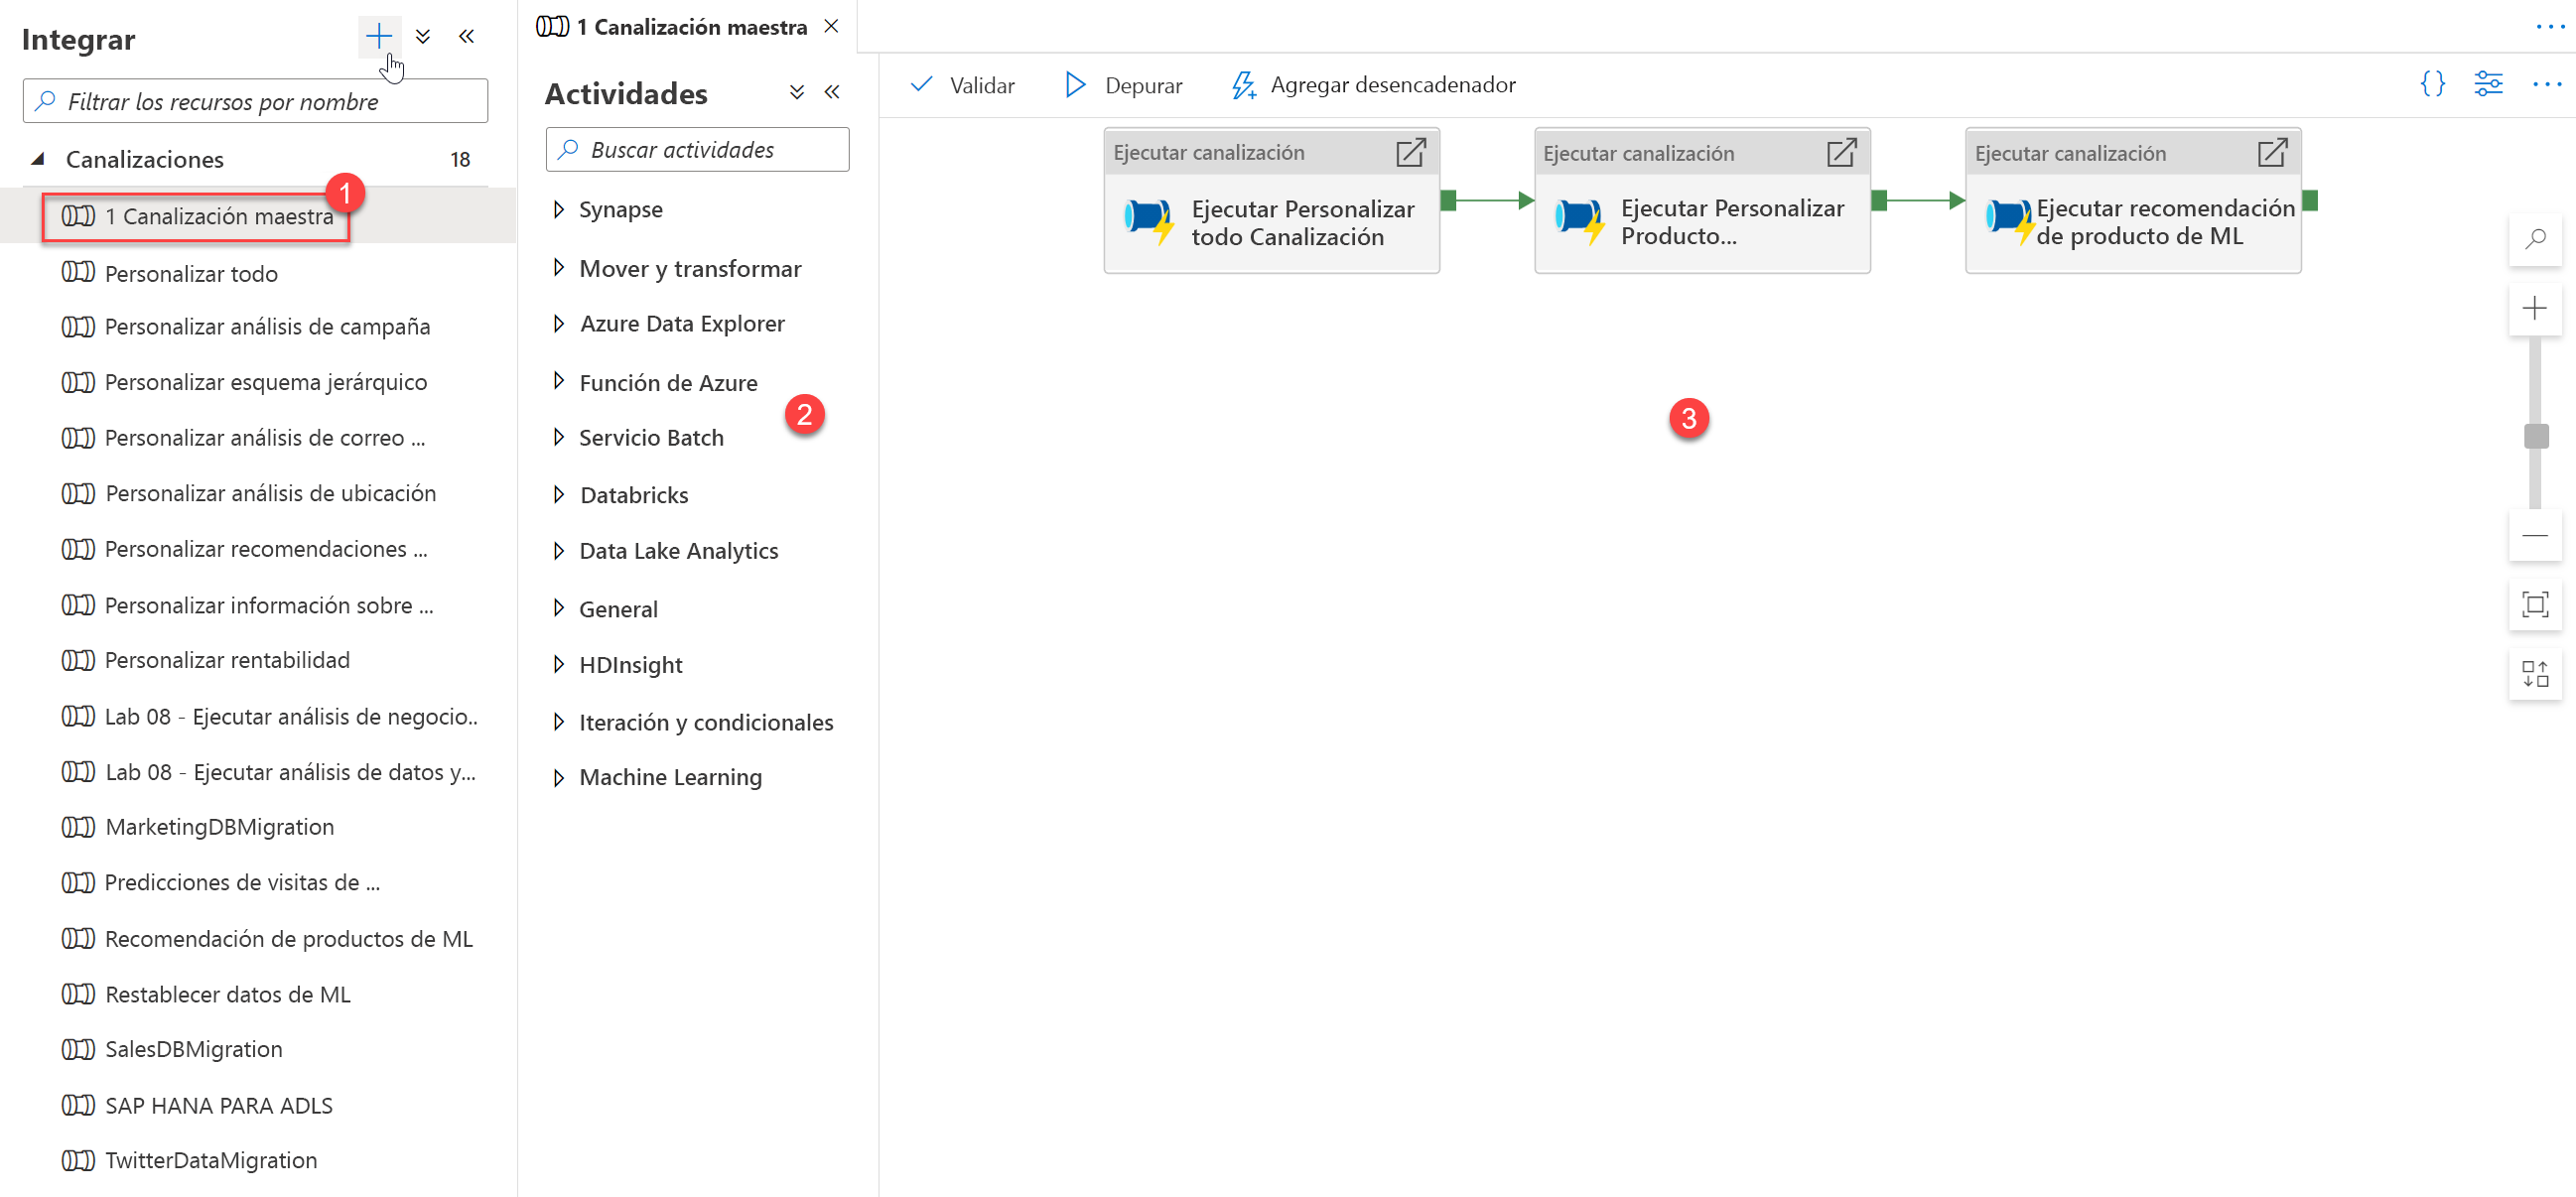 Viewing Azure Synapse pipelines list